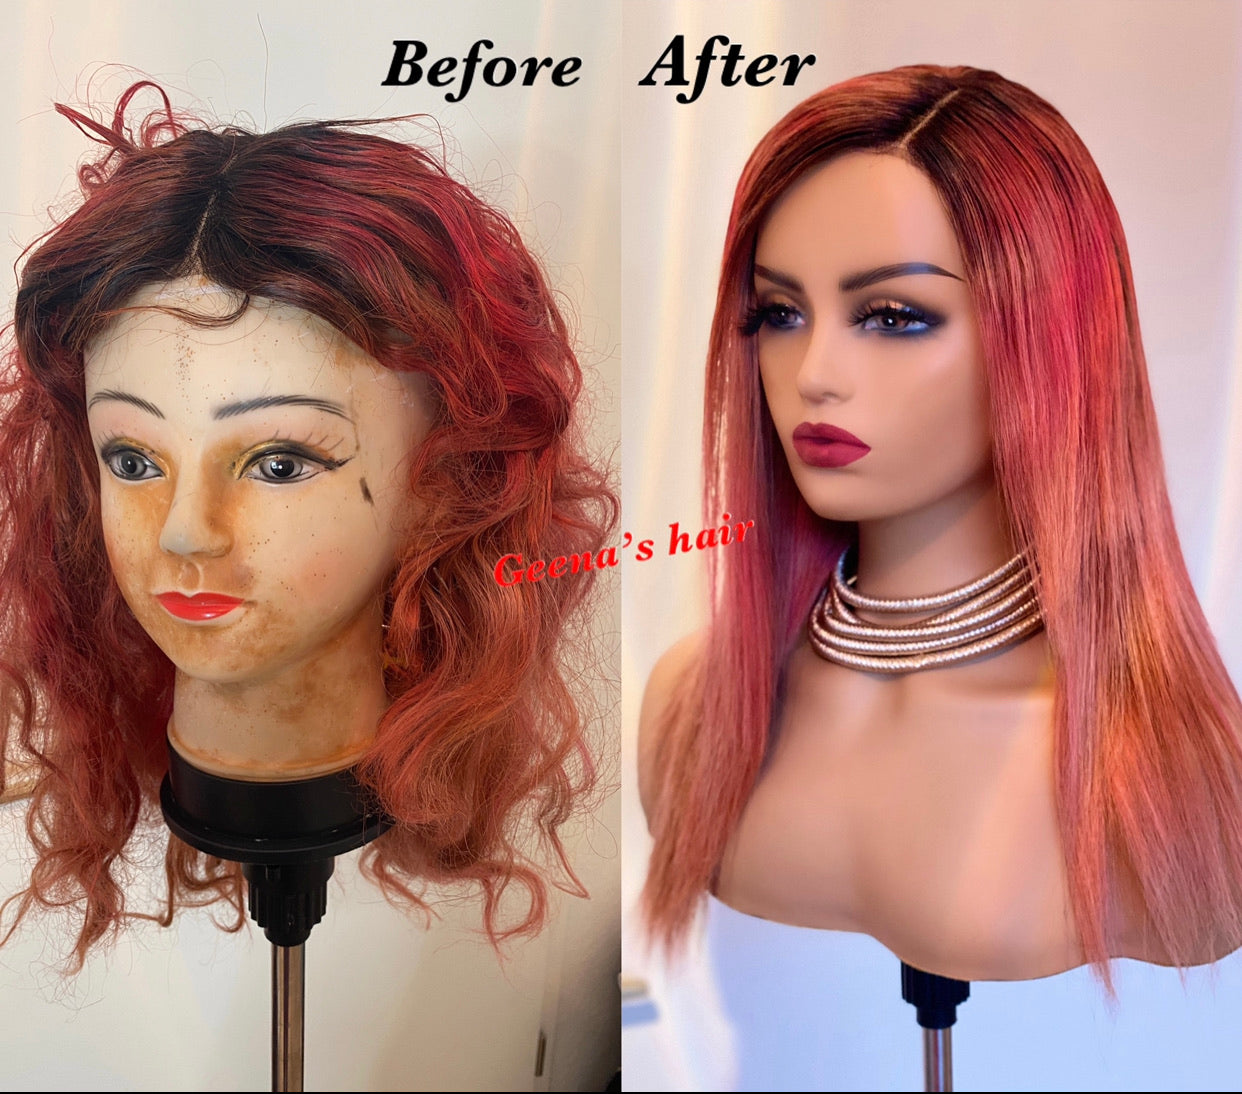 Revamping and bleaching services